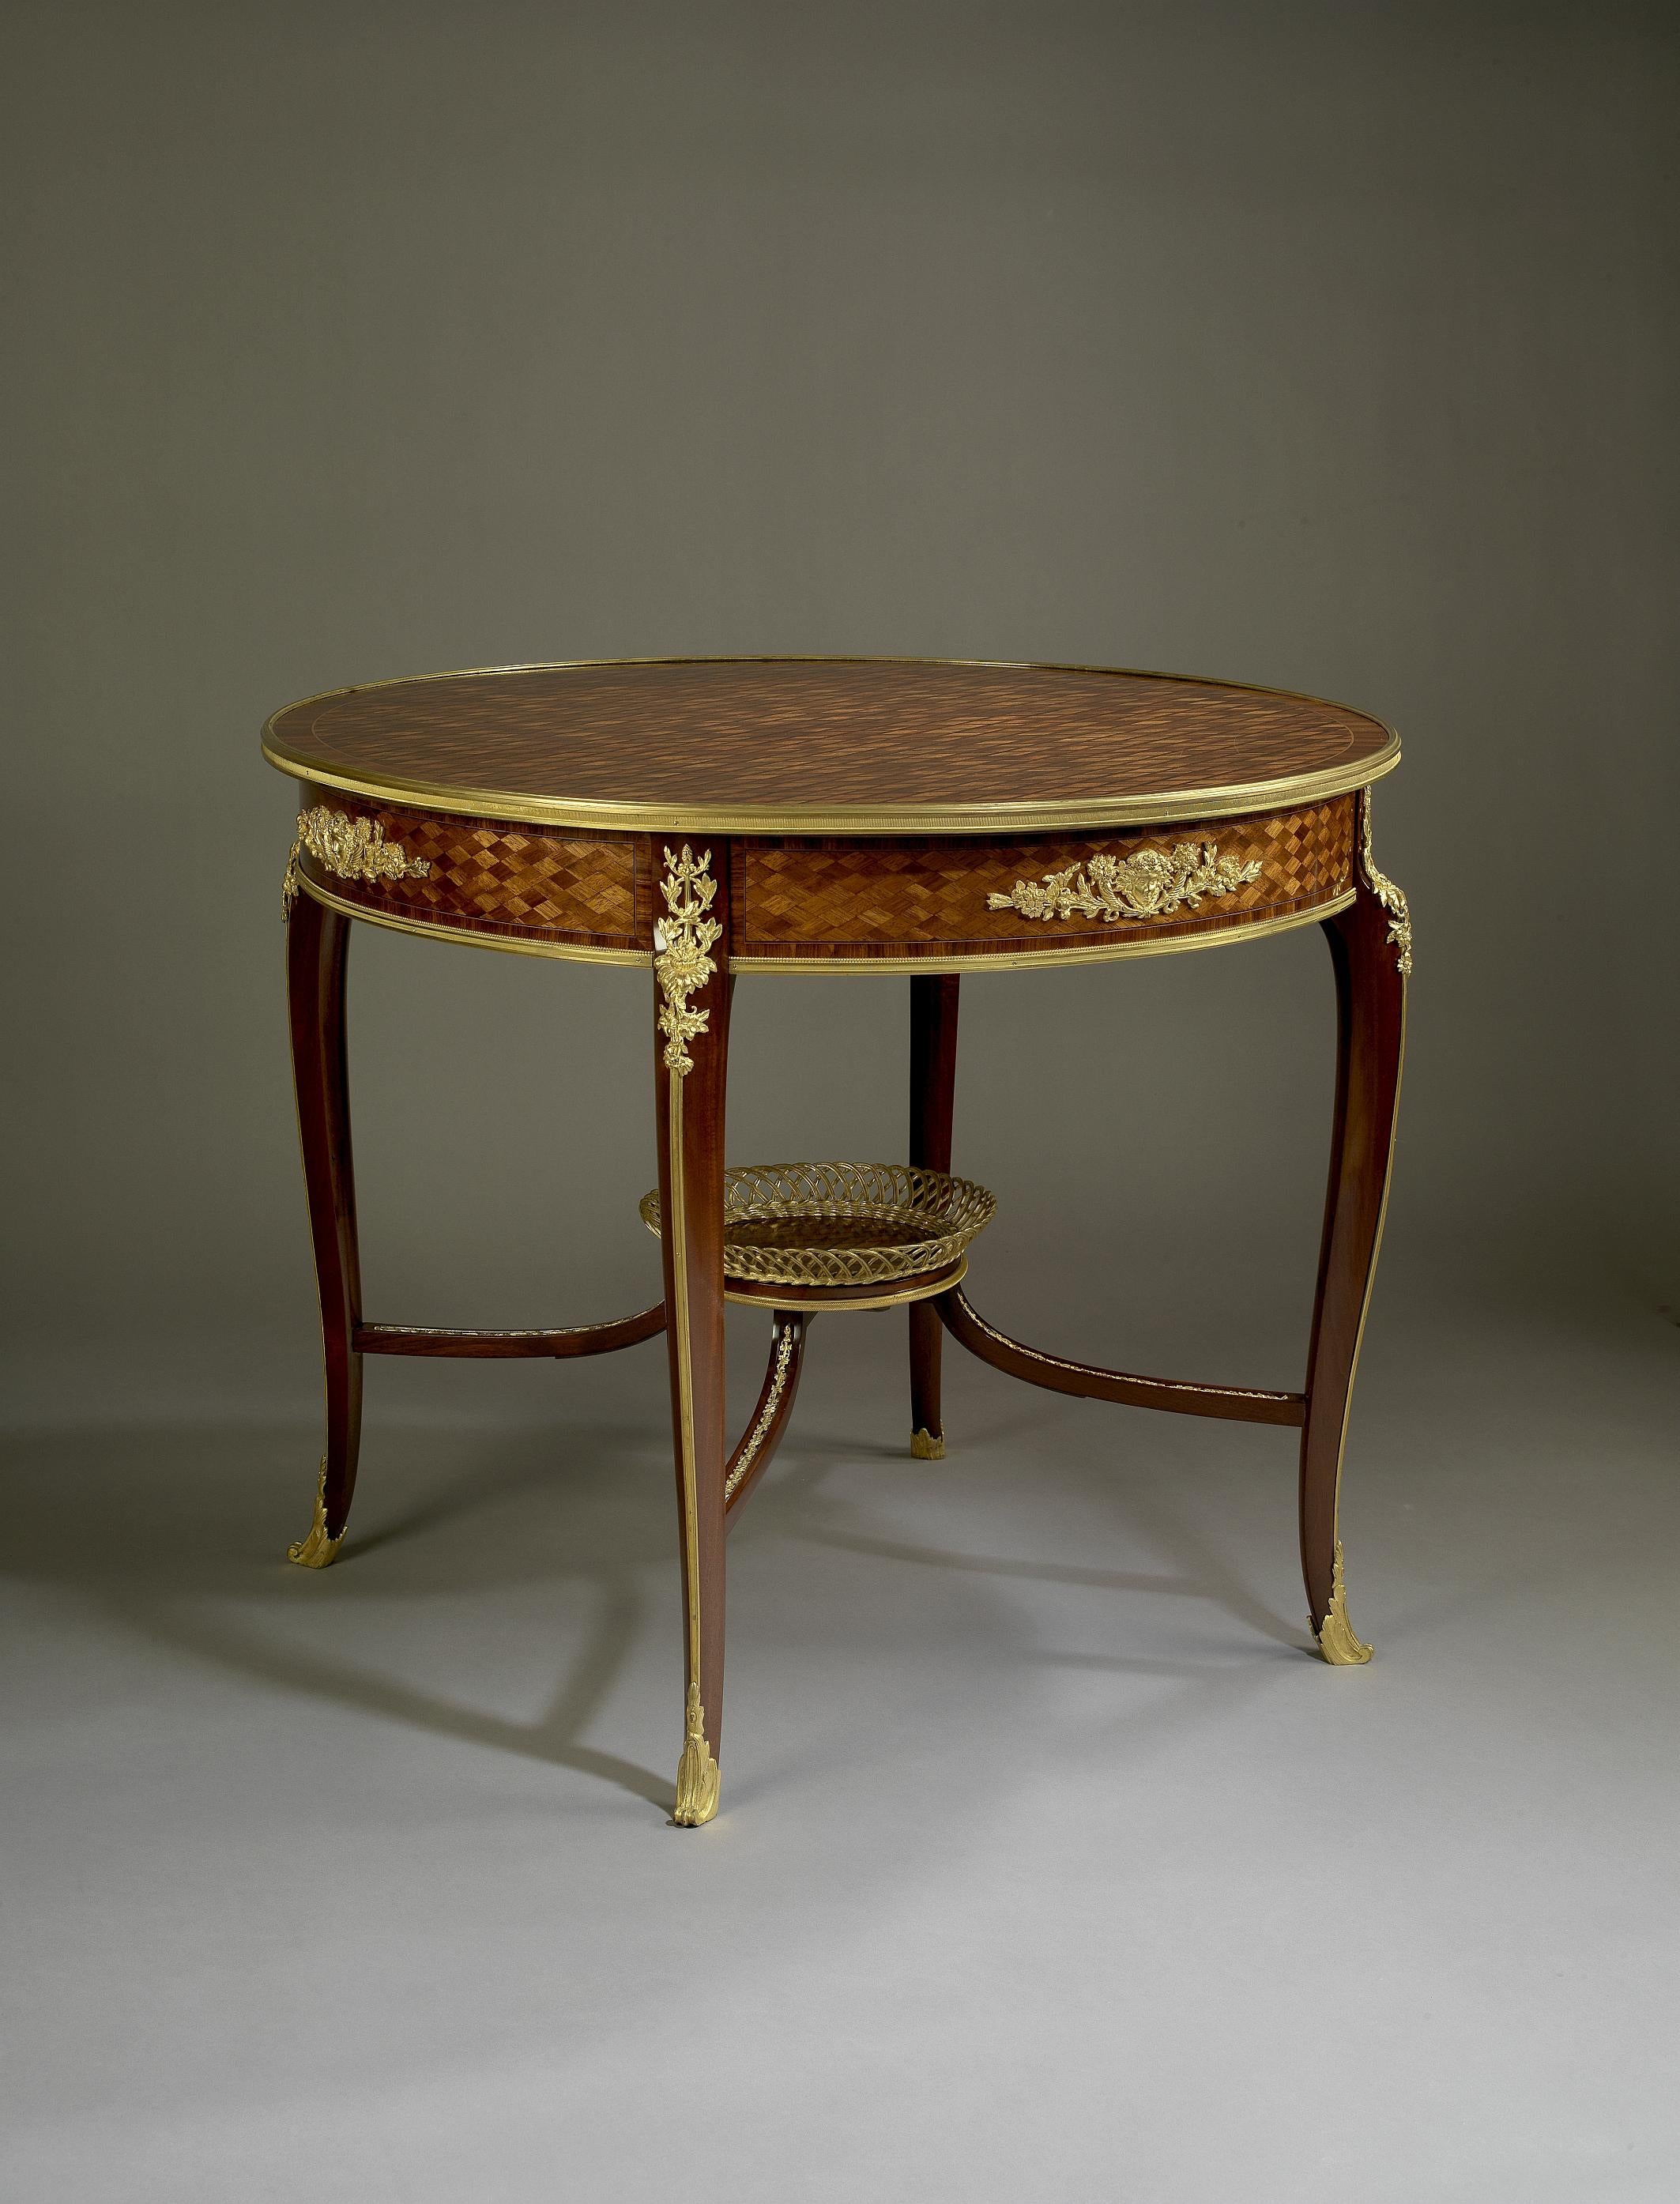 A gilt-bronze mounted parquetry inlaid centre table, Attributed to François Linke.

French, circa 1900.

The circular parquetry top of diapered trellis with gilt-bronze edging above a similar frieze with finely cast gilt bronze mounts of female